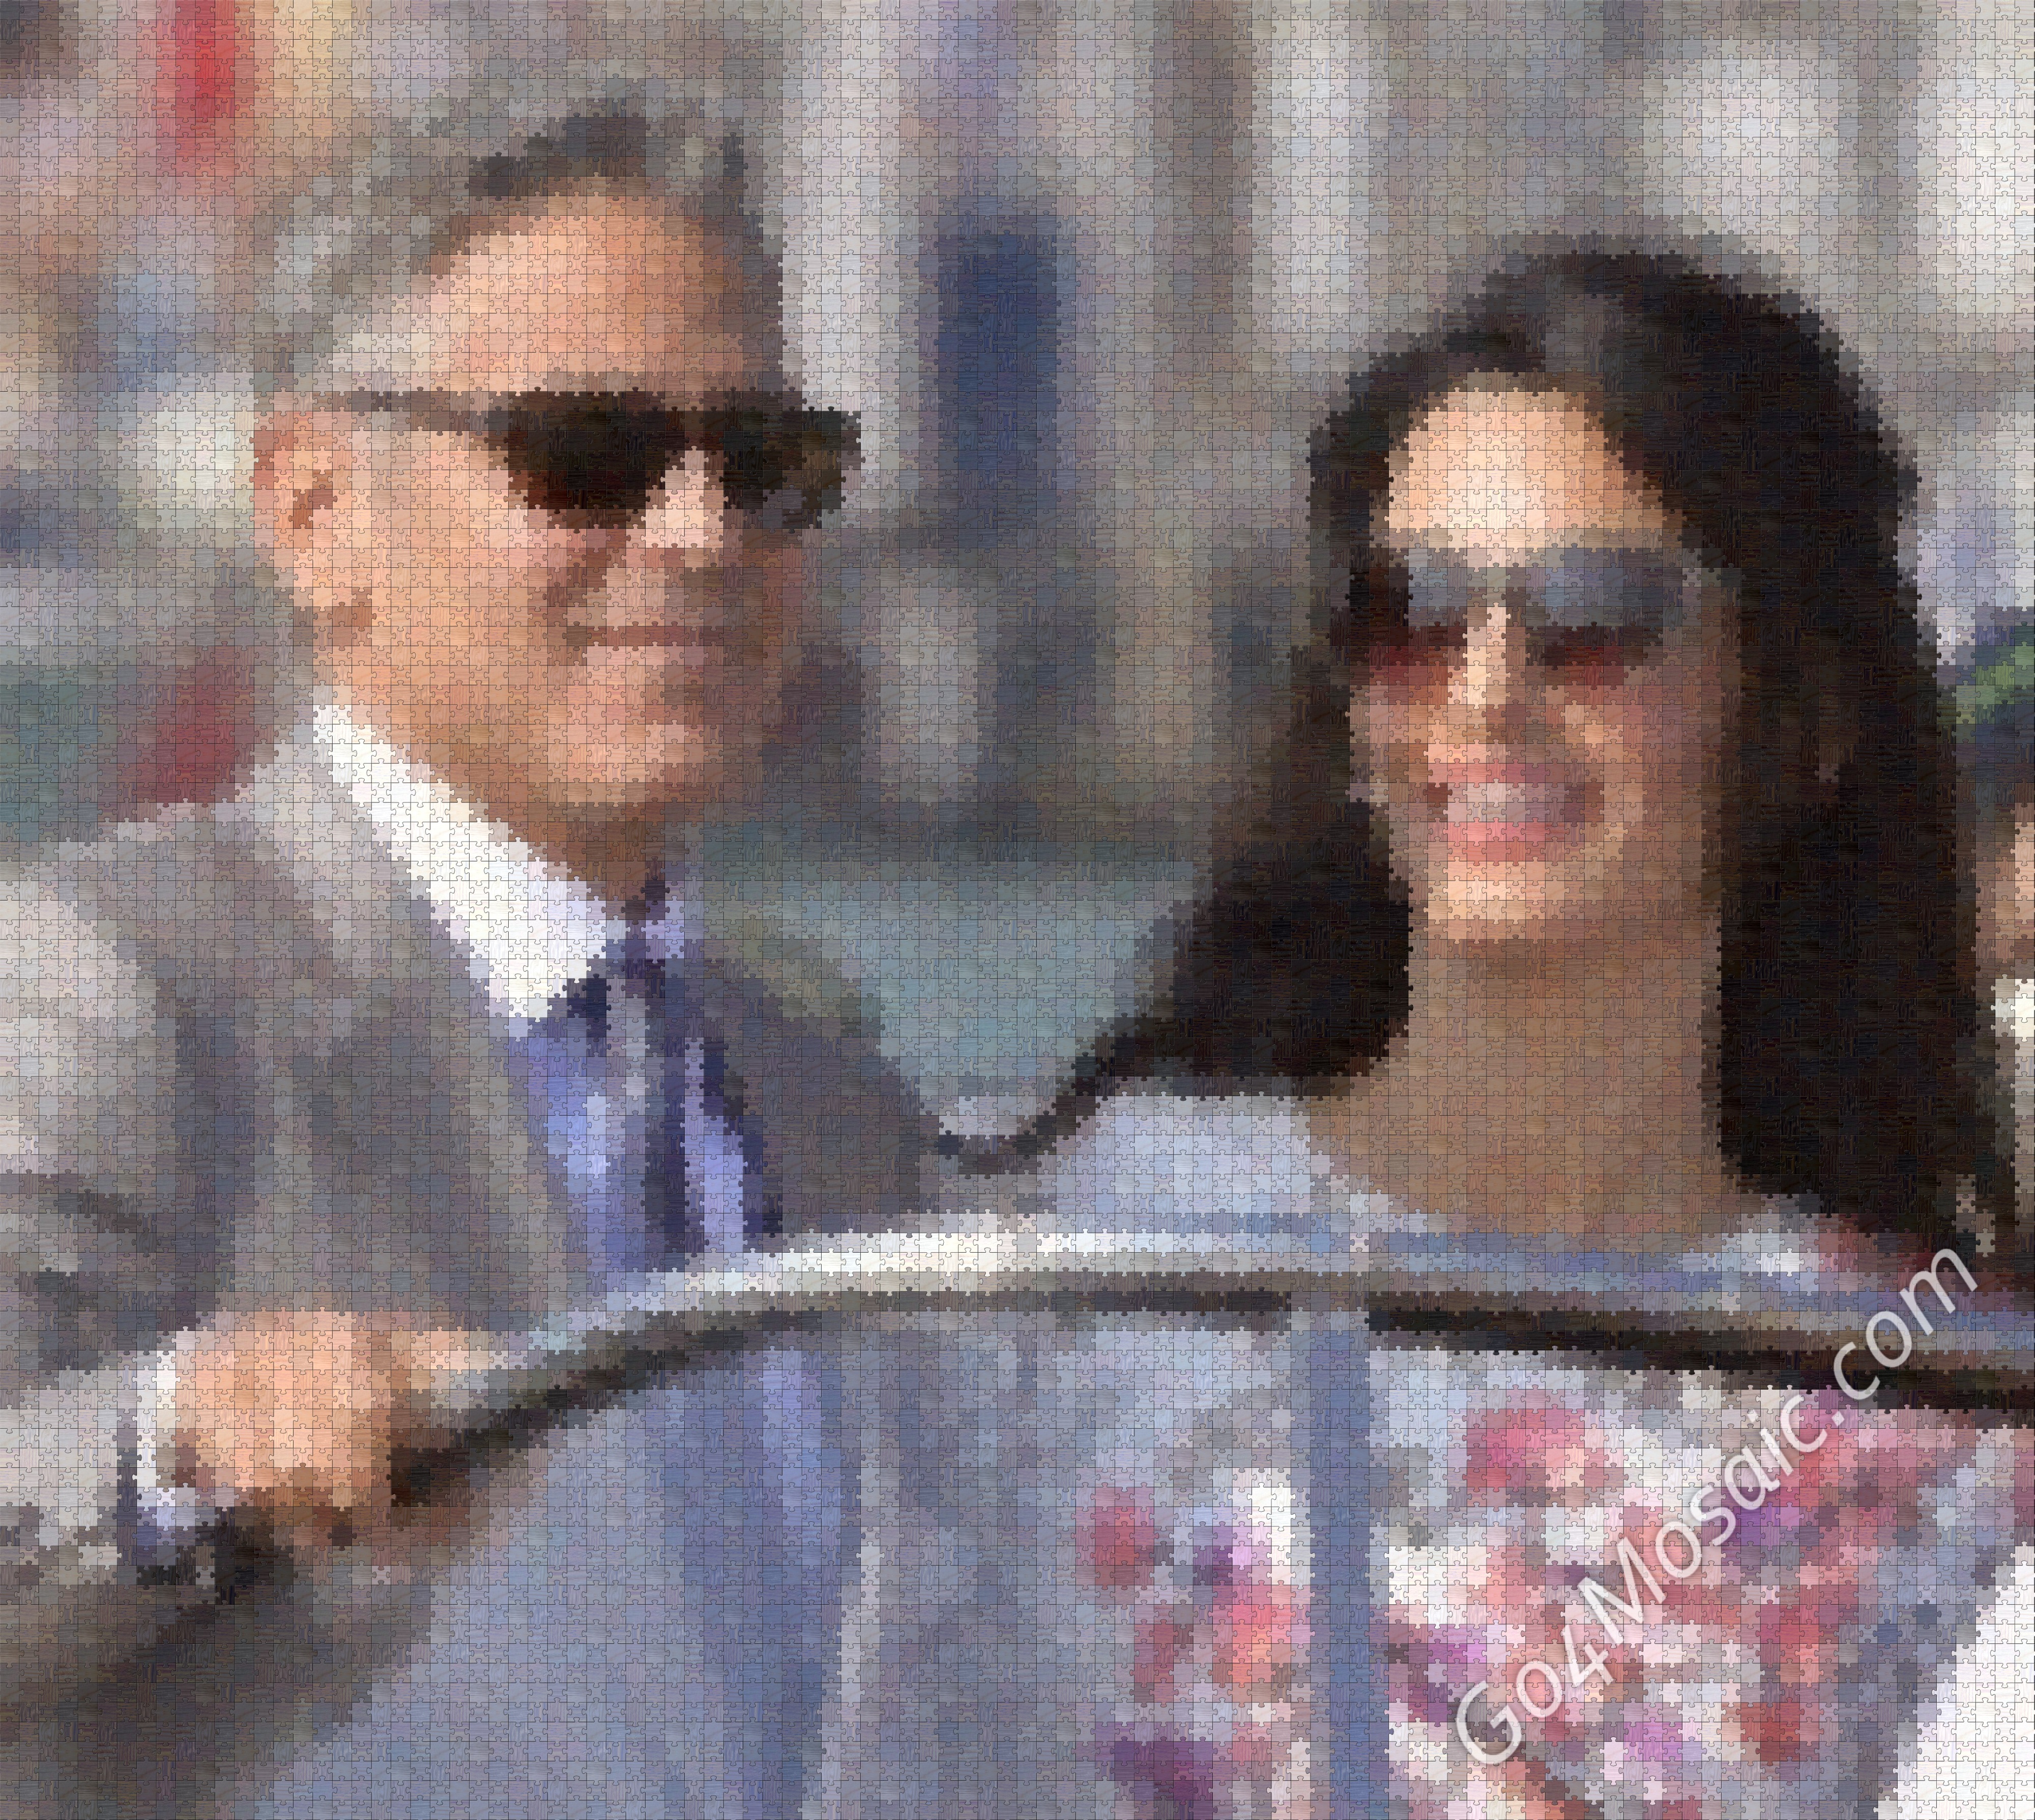 George Clooney and Amal Alamuddin mosaic from Wooden Jigsaw